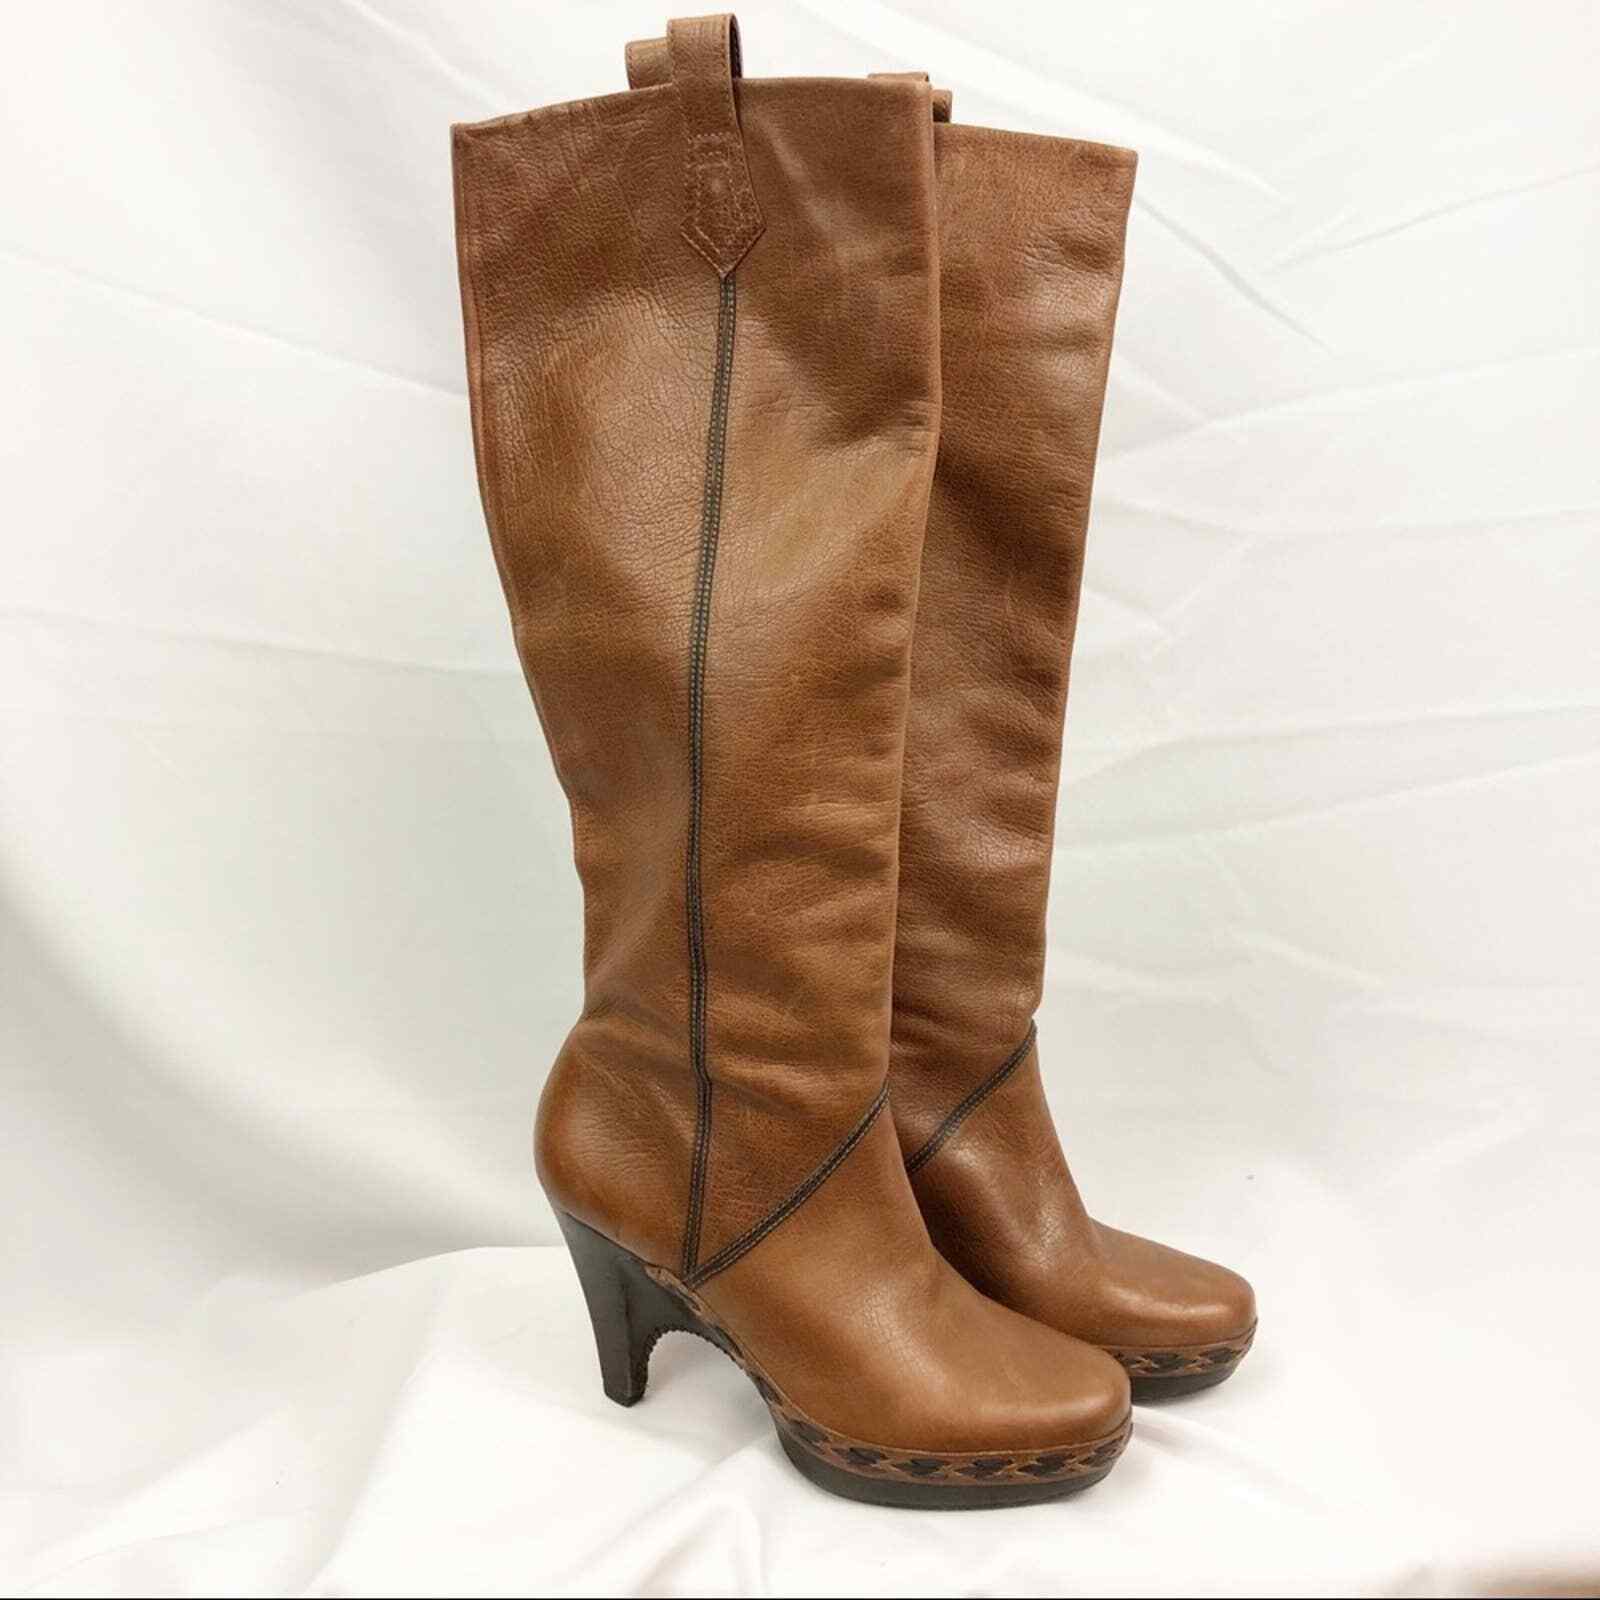 COLE HAAN Kenna Tall Leather Whip Stitch Boots 7 - Gem